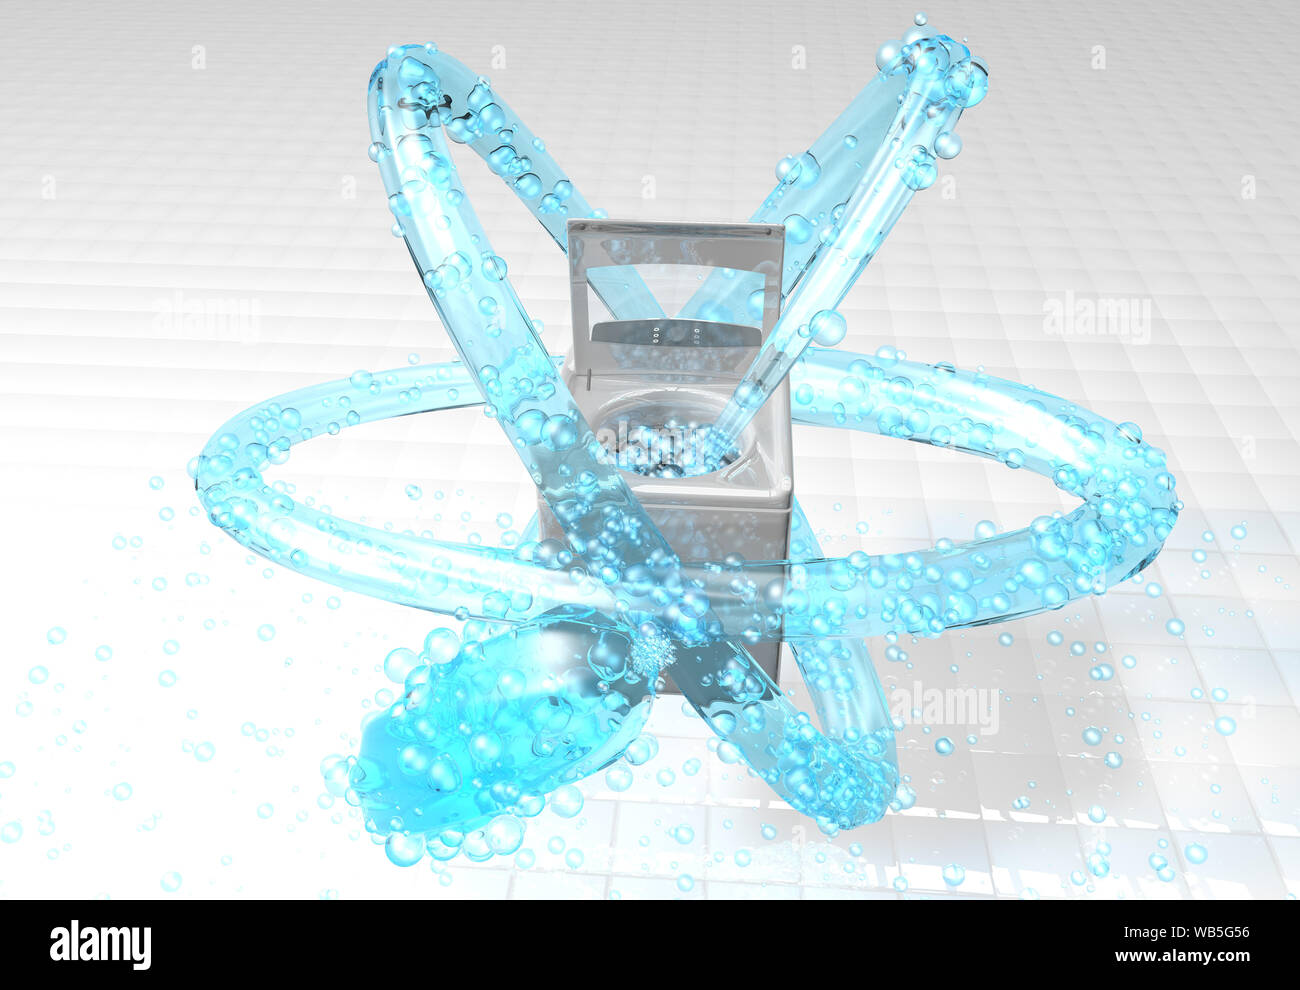 Front view of blue water jet with bubbles comes out of the interior of a laundry machine and turns 3 times around the washing machine on a white squar Stock Photo